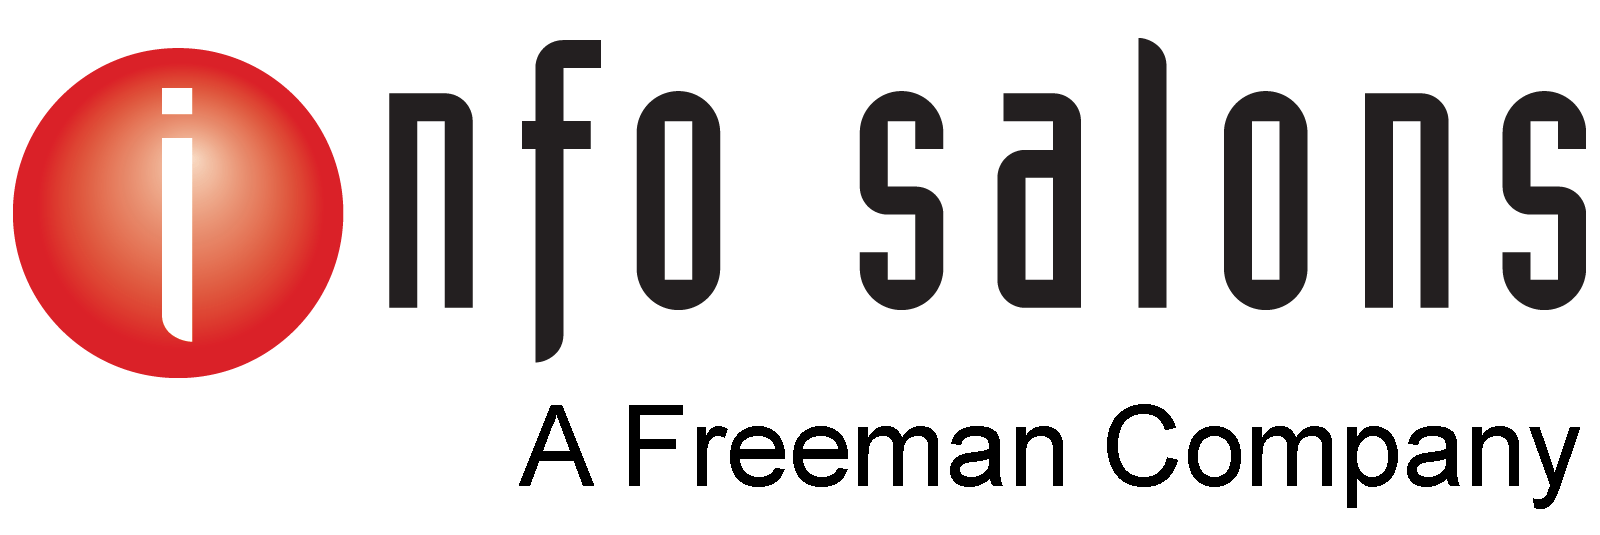 Freeman Company Logo - Freeman Continues Growth with Acquisition of Info Salons Event ...